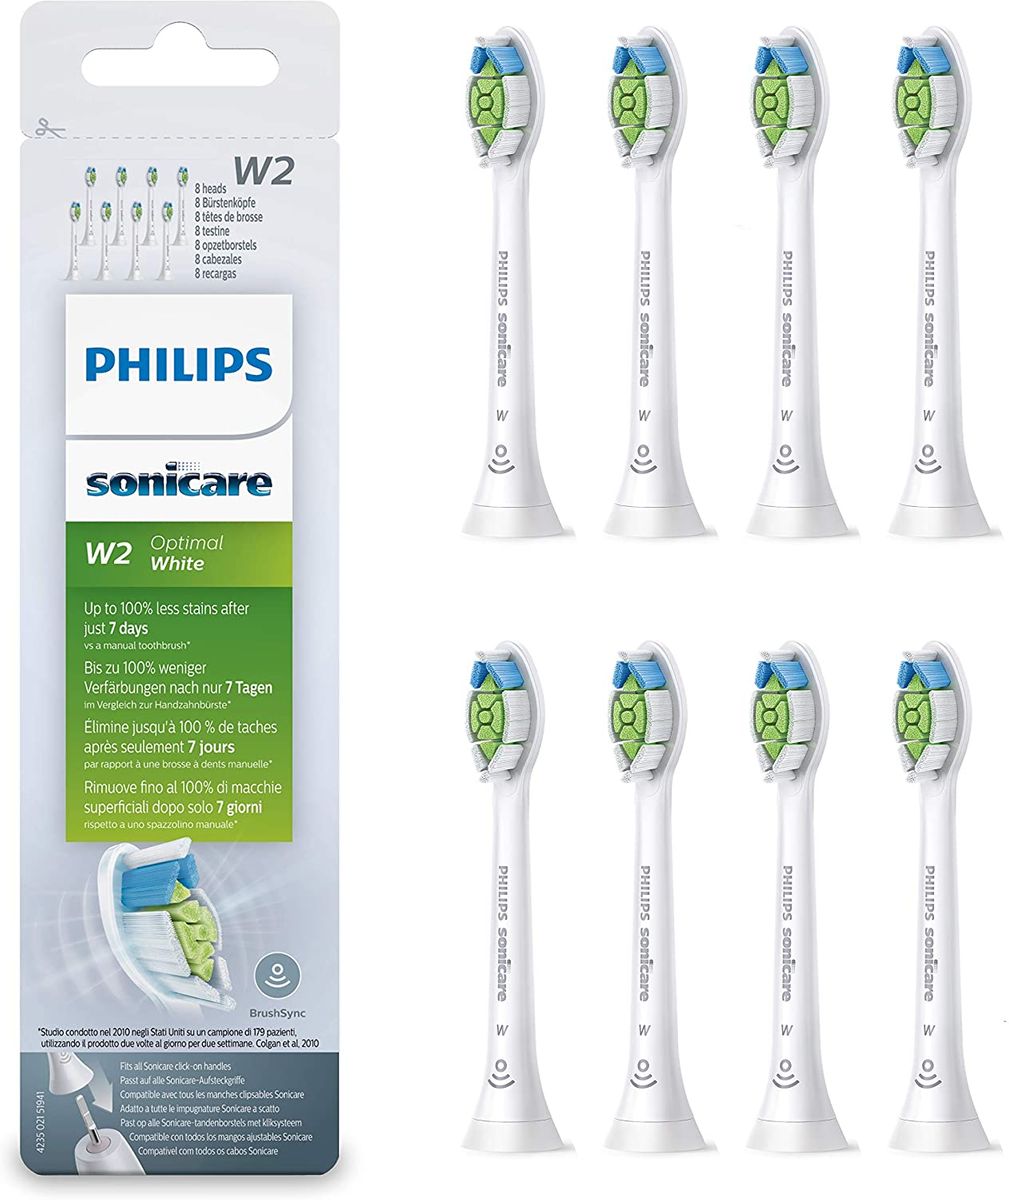 Philips Sonicare Original Optimal White HX6068/12 brush, removes up to 2x more discoloration, RFID chip, standard, pack of 8, White Pack of 8 Single